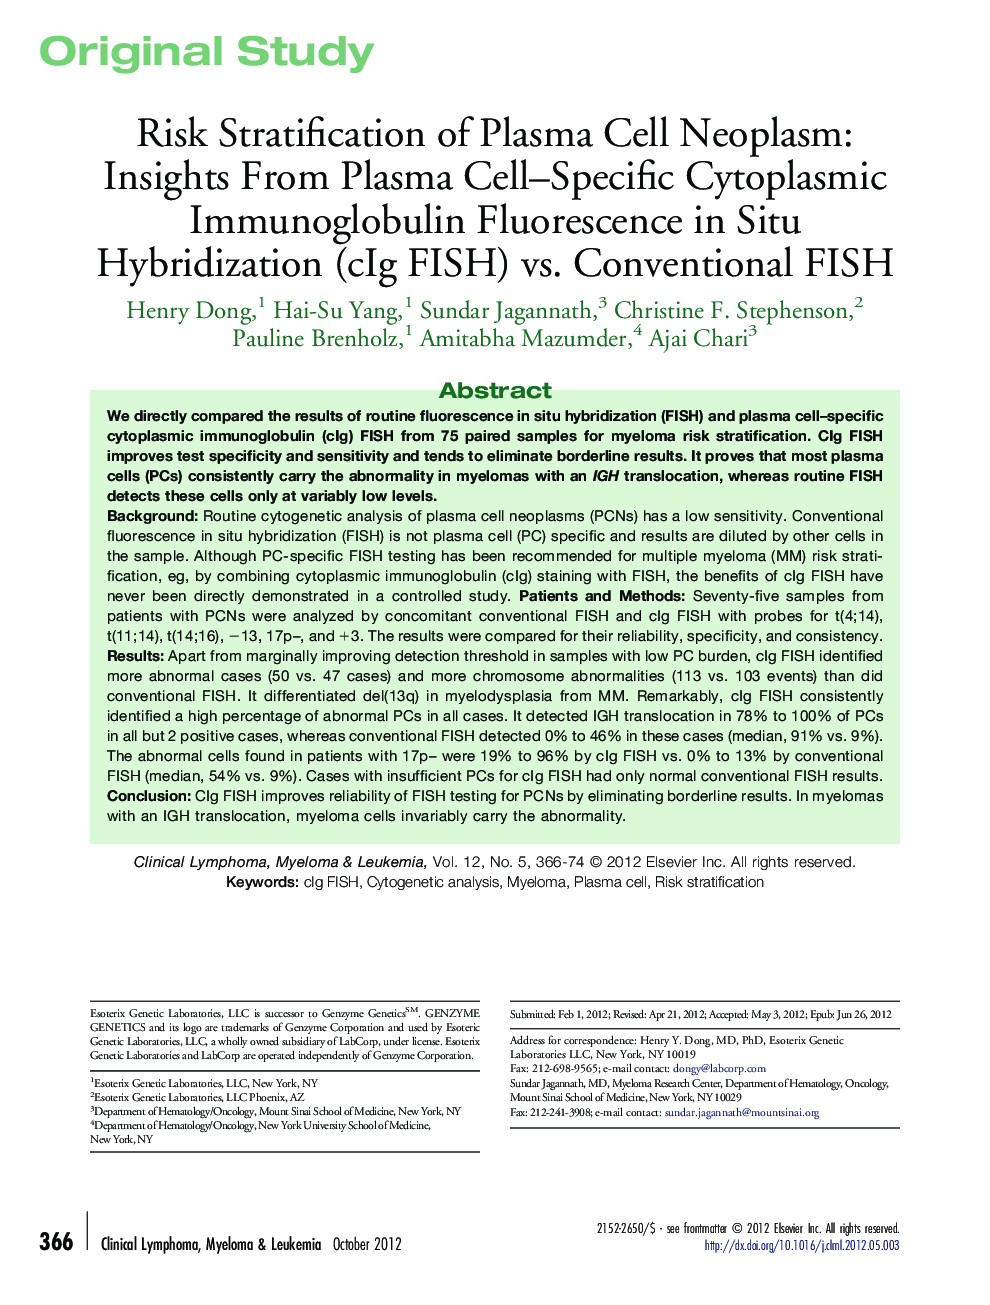 Risk Stratification of Plasma Cell Neoplasm: Insights From Plasma Cell–Specific Cytoplasmic Immunoglobulin Fluorescence in Situ Hybridization (cIg FISH) vs. Conventional FISH 